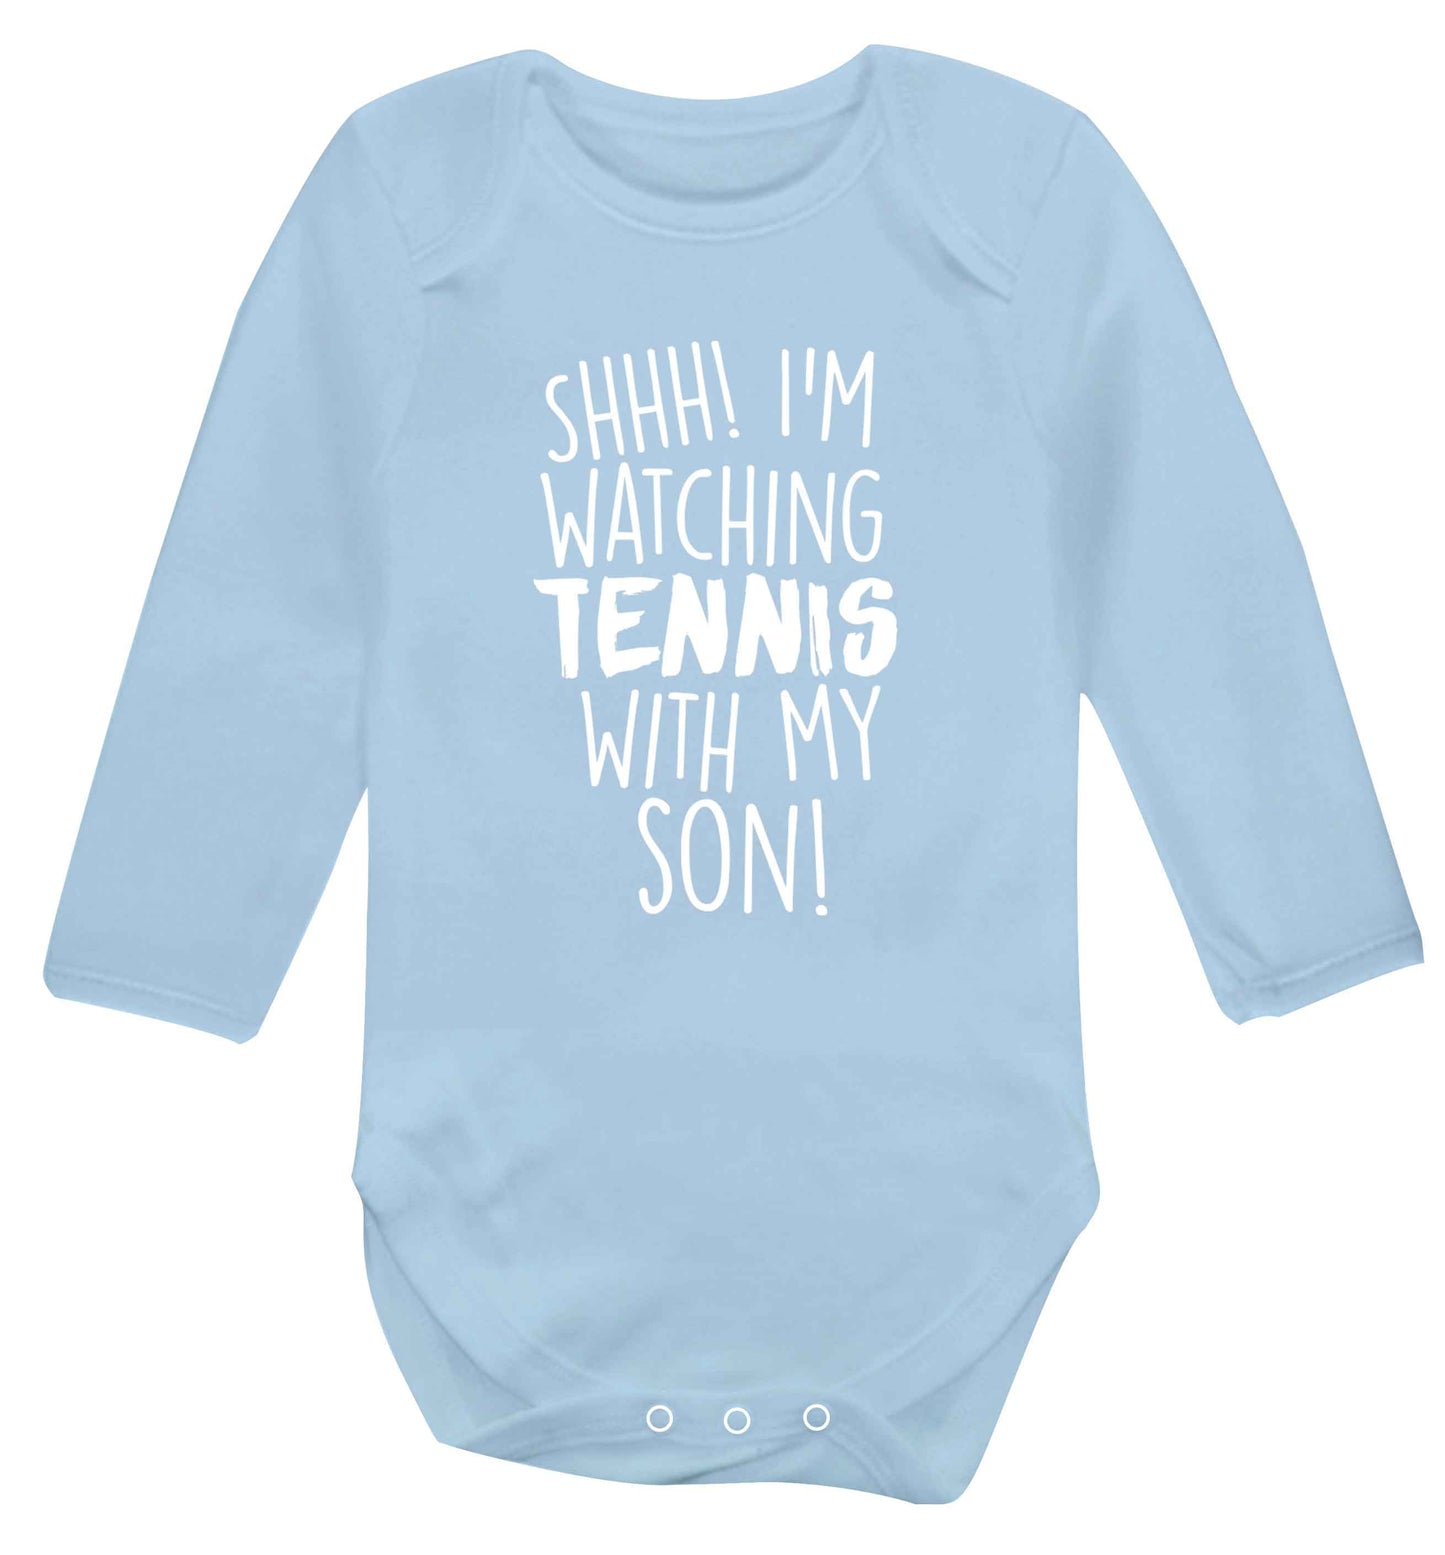 Shh! I'm watching tennis with my son! Baby Vest long sleeved pale blue 6-12 months